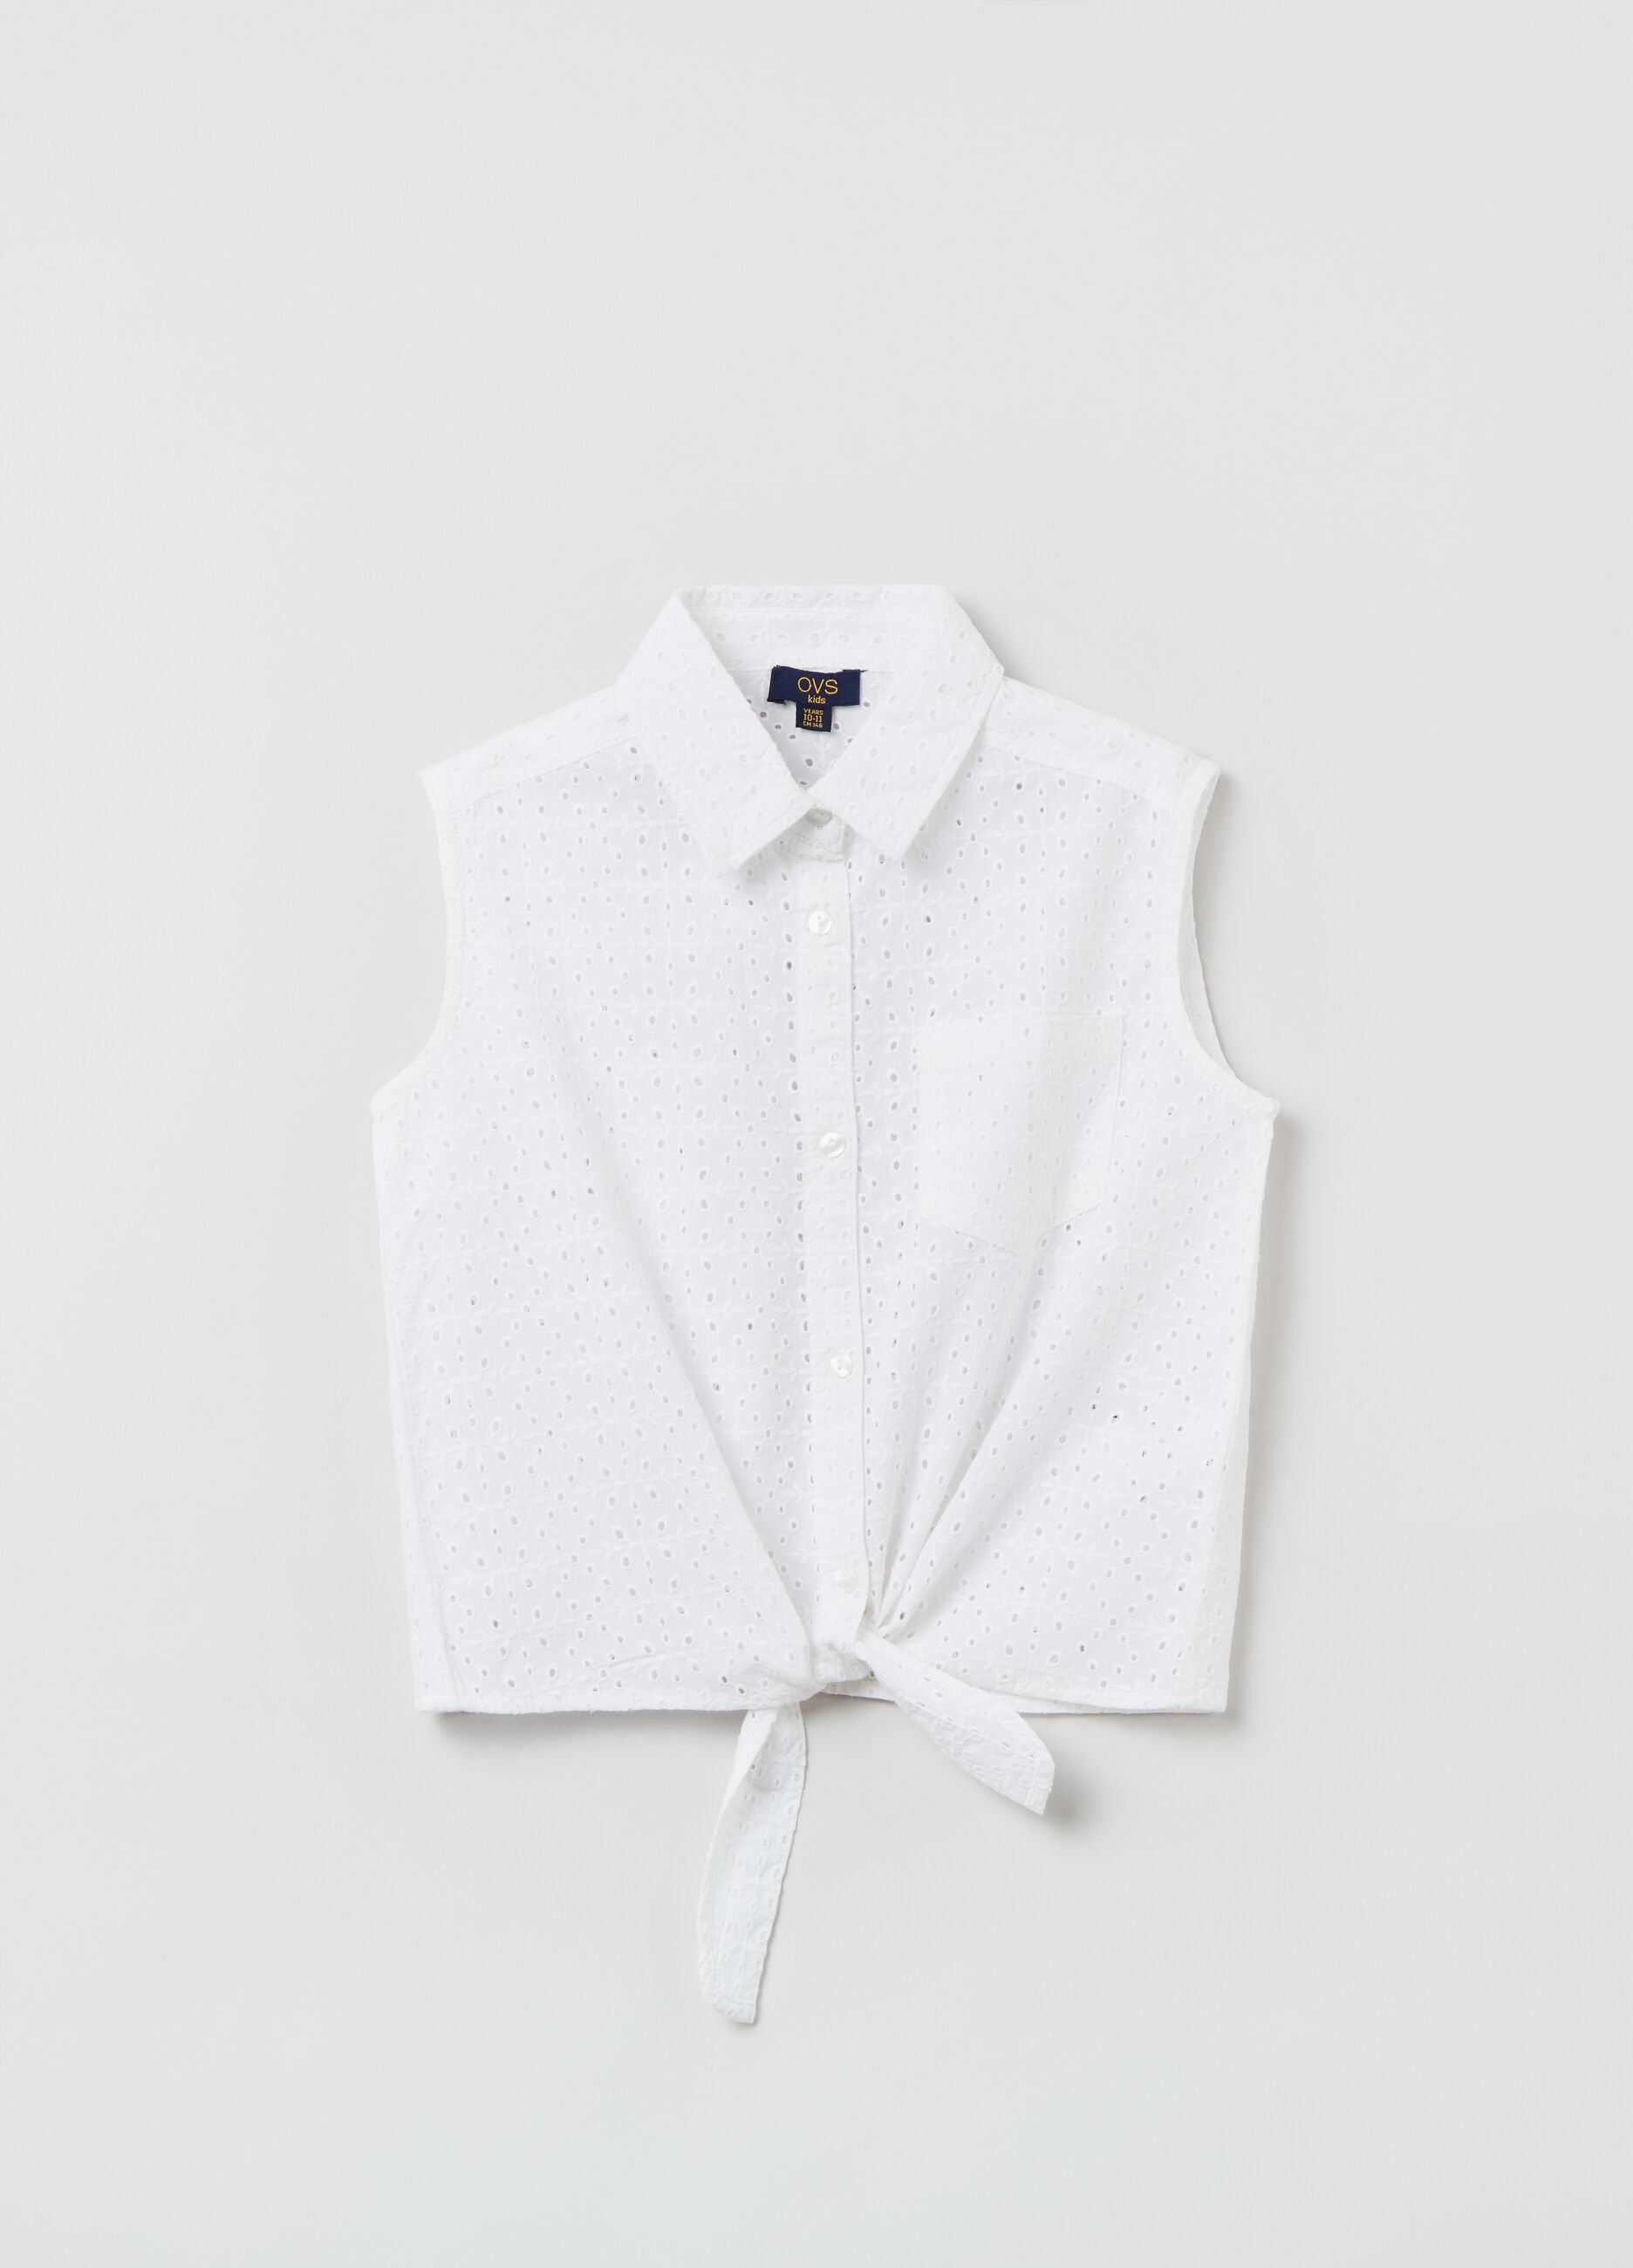 Sleeveless shirt in broderie anglaise